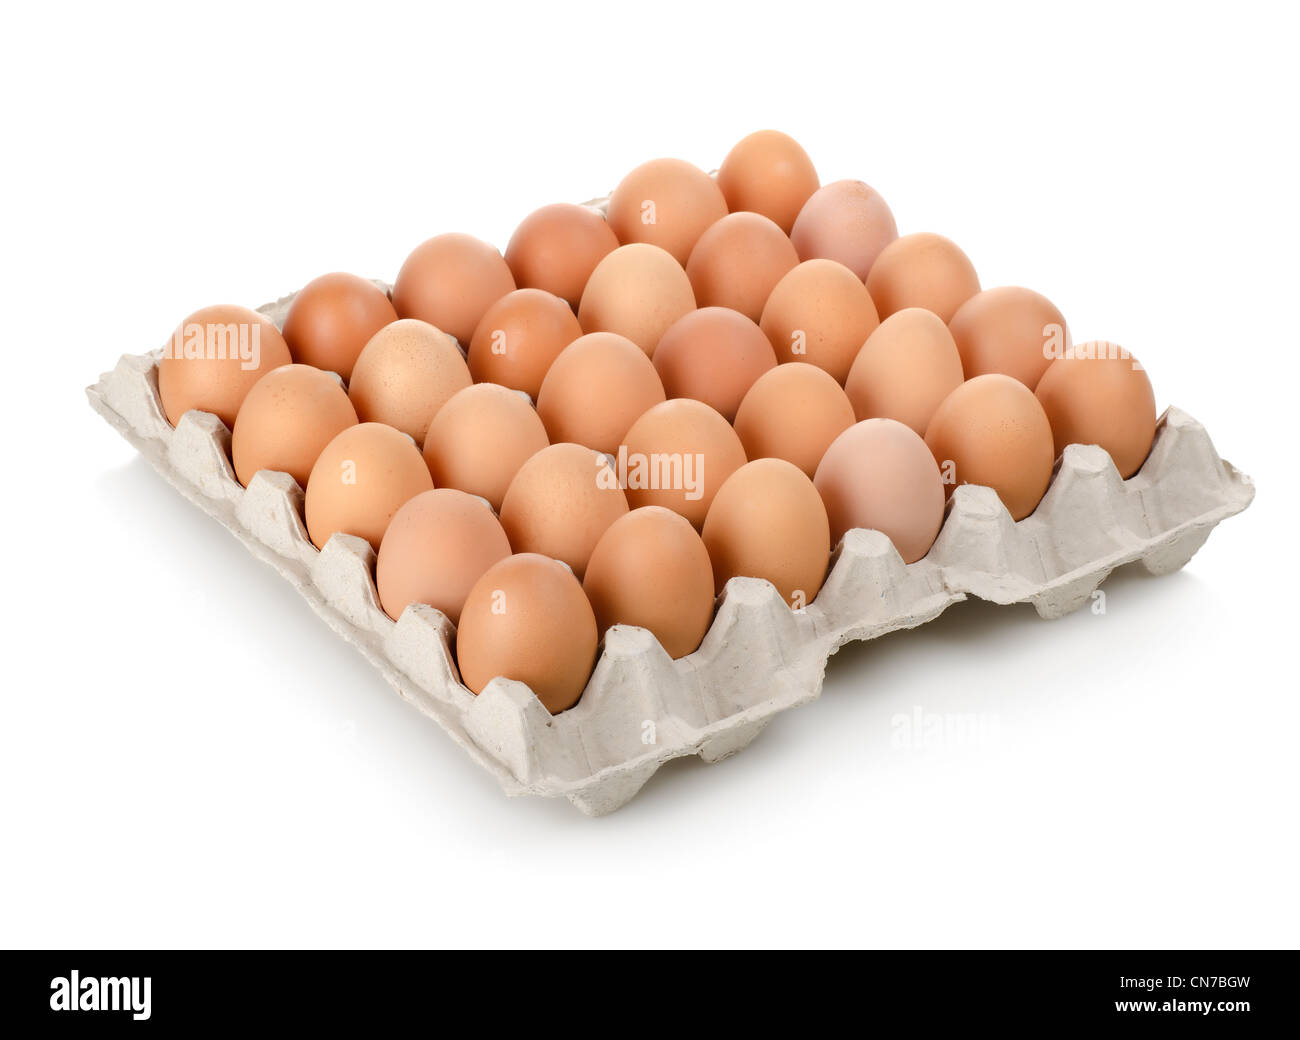 Eggs in a carton isolated on a white background Stock Photo